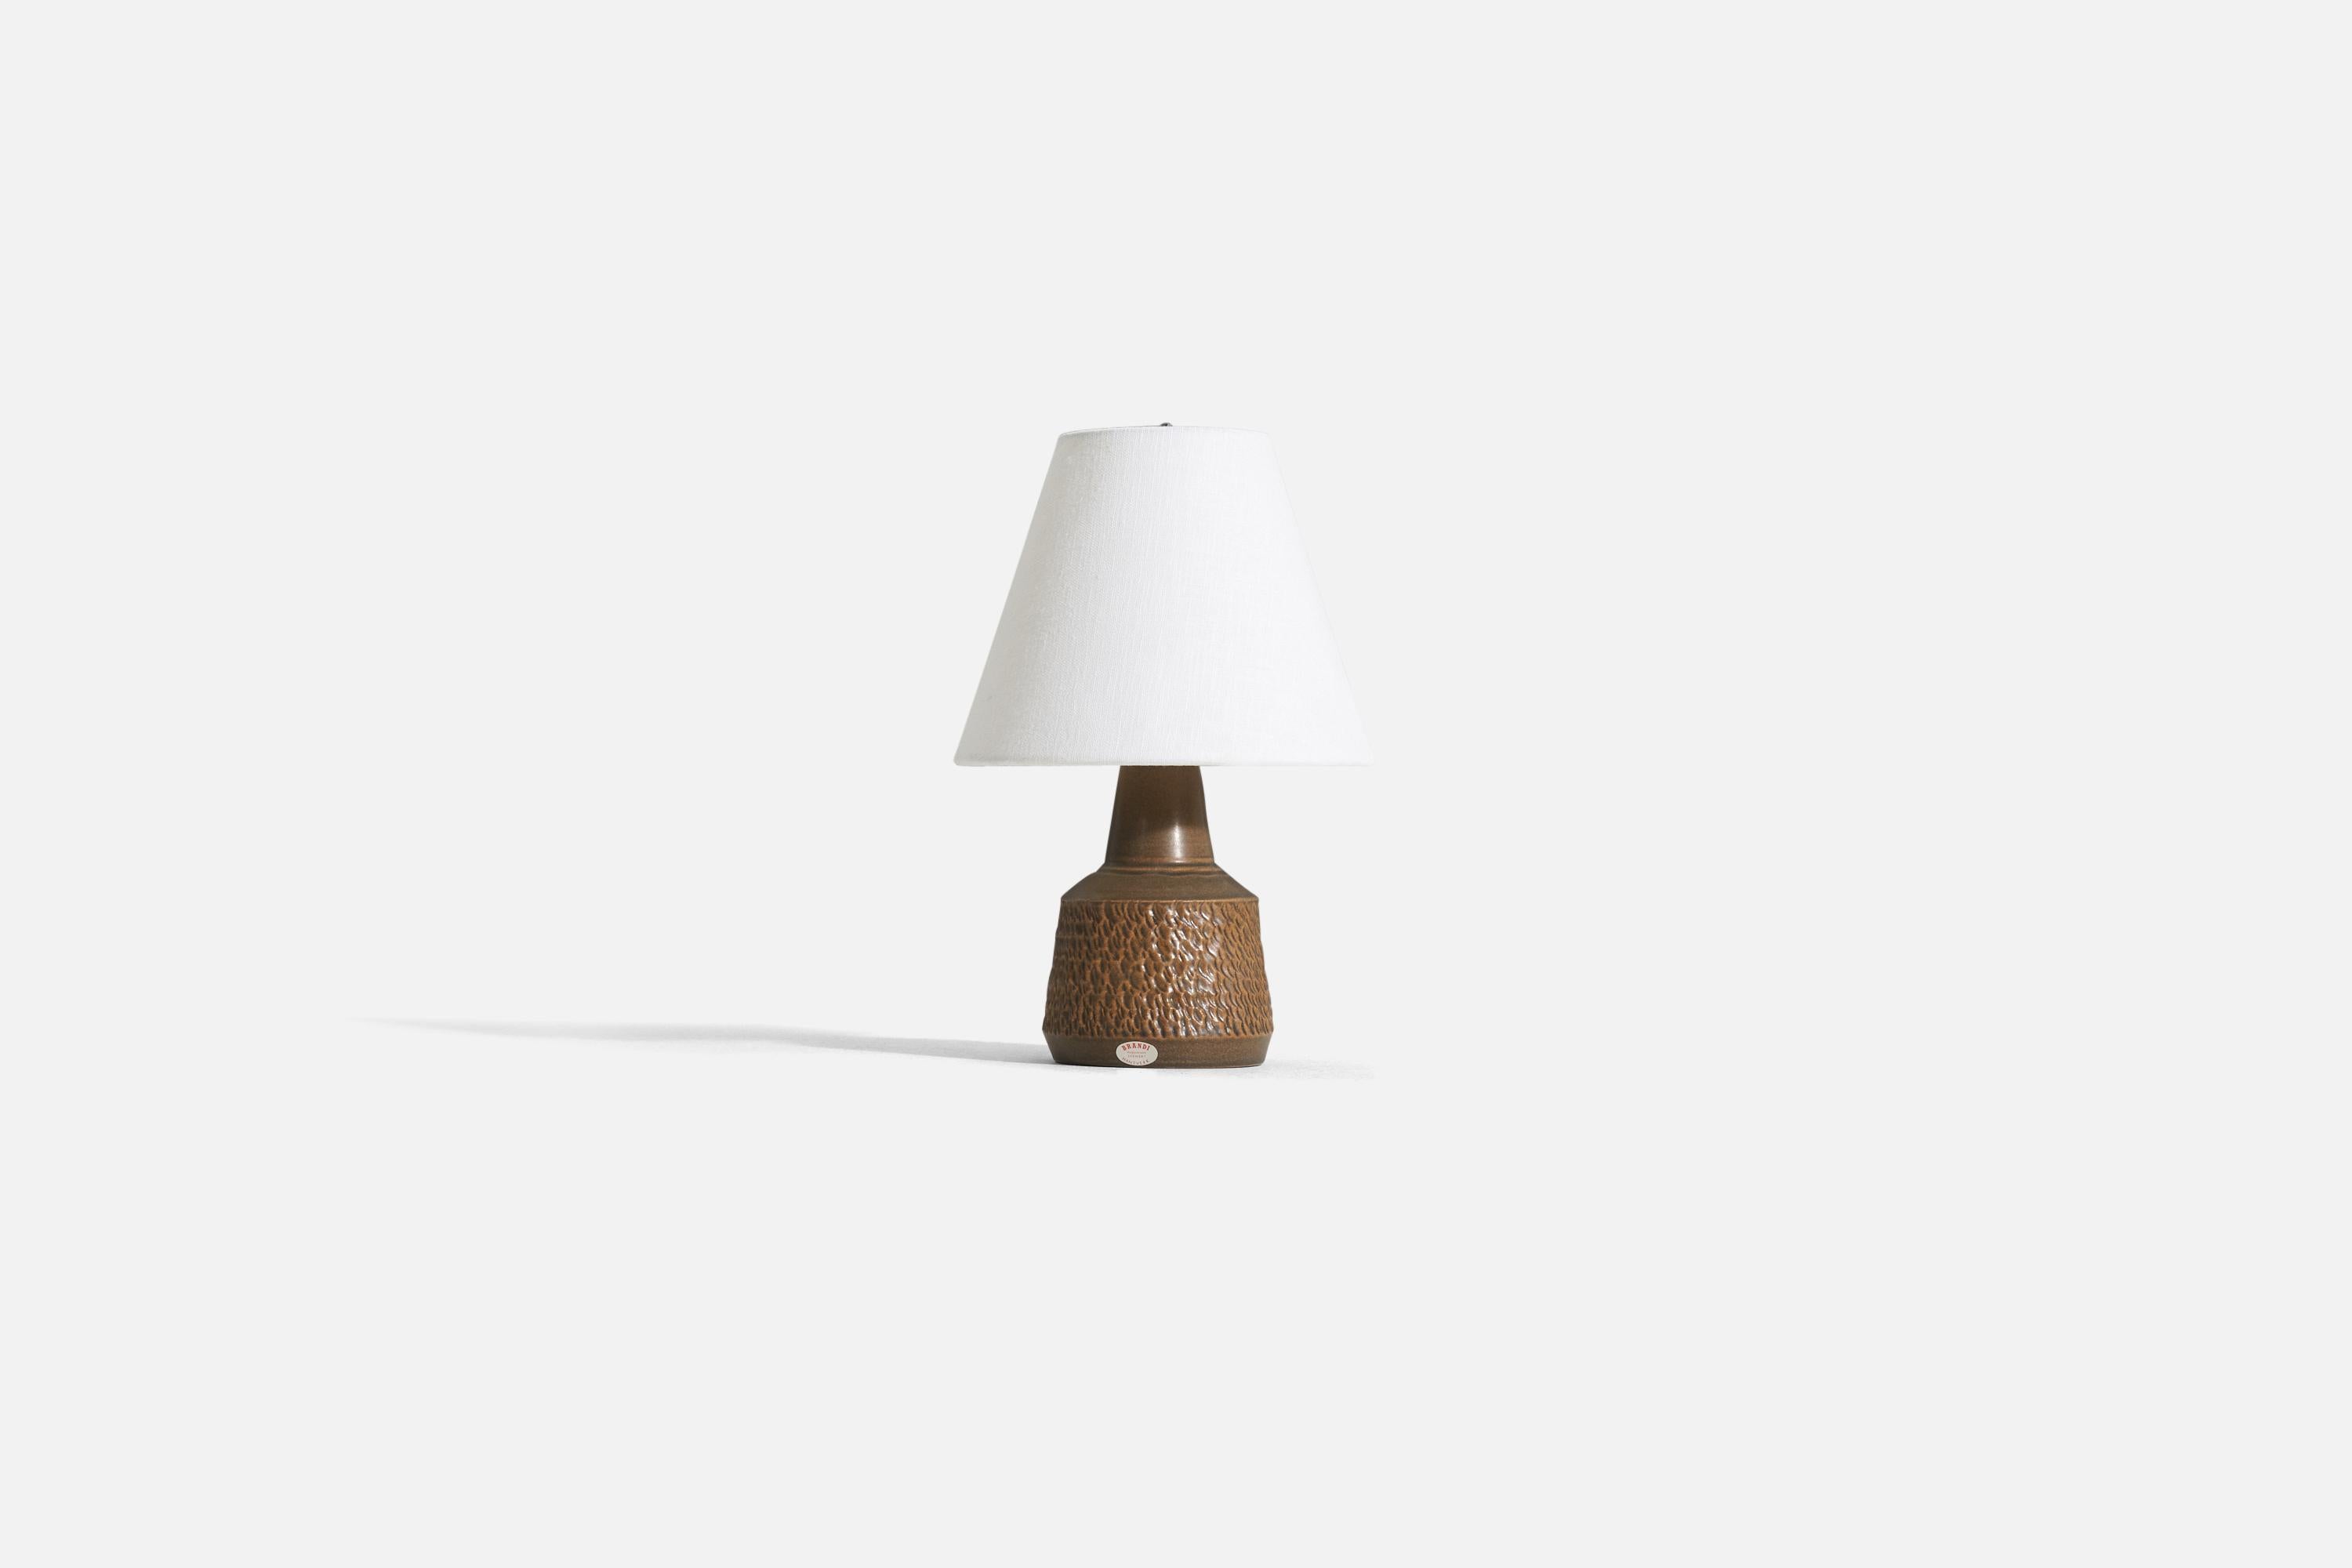 A brown glazed stoneware table lamp designed by Henry Brandi and produced by his own firm, Brandi Vejbystrand, Sweden, 1960s. Marked and labeled. 

Sold without lampshade. 

Dimensions of lamp (inches) : 8.5 x 4.5 x 4.5 (H x W x D).
Dimensions